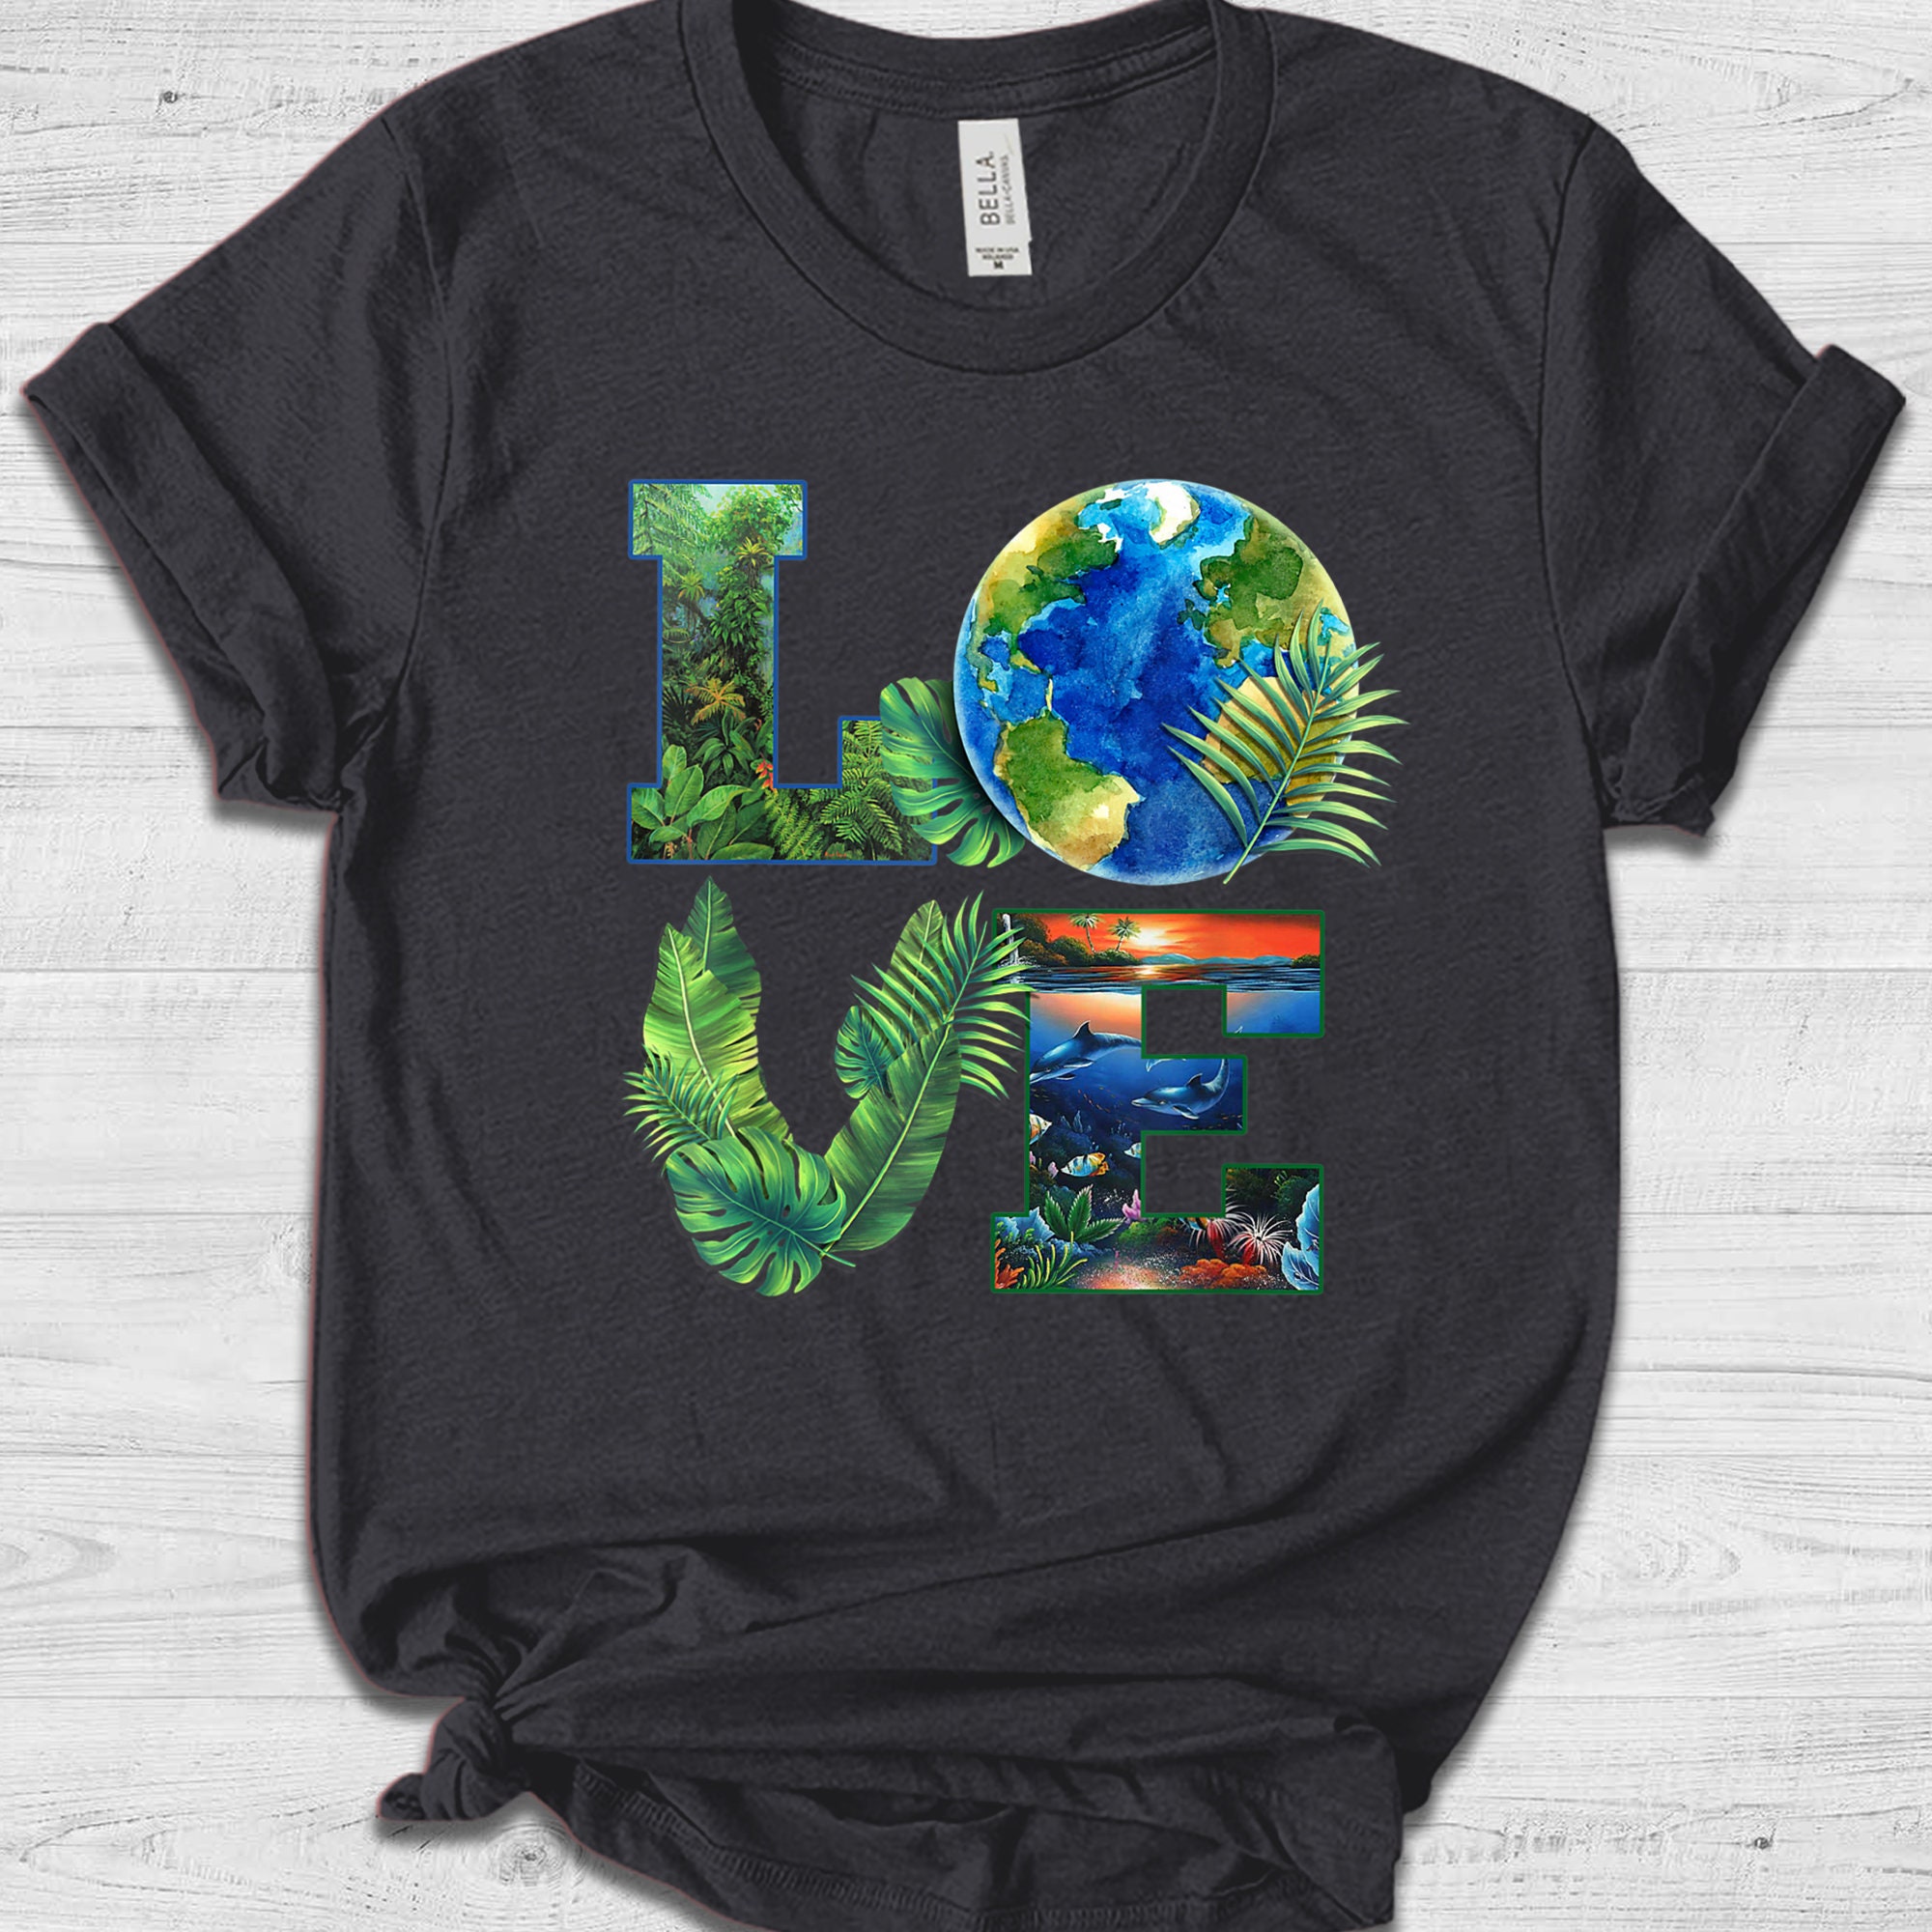 Discover Save the Earth T-shirt, Earth Day Awareness